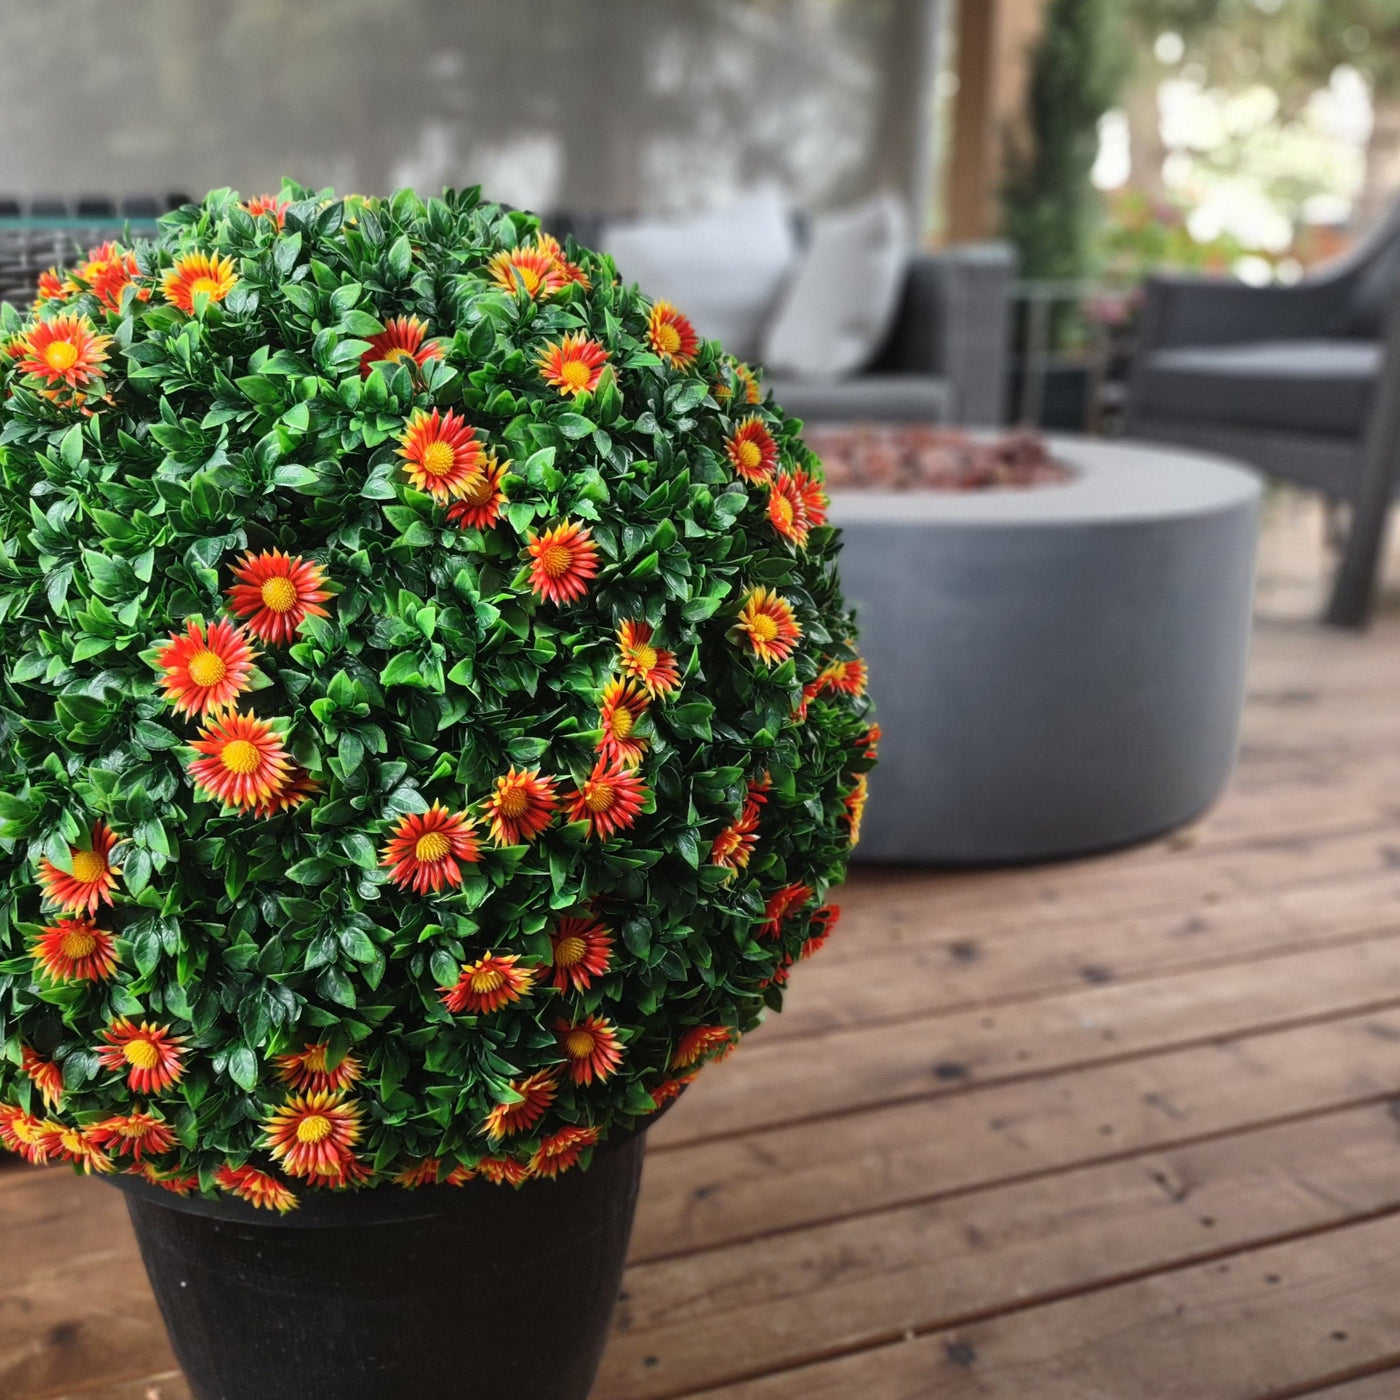 365 Curb Appeal Topiary ball 21" XL Mums Topiary Ball